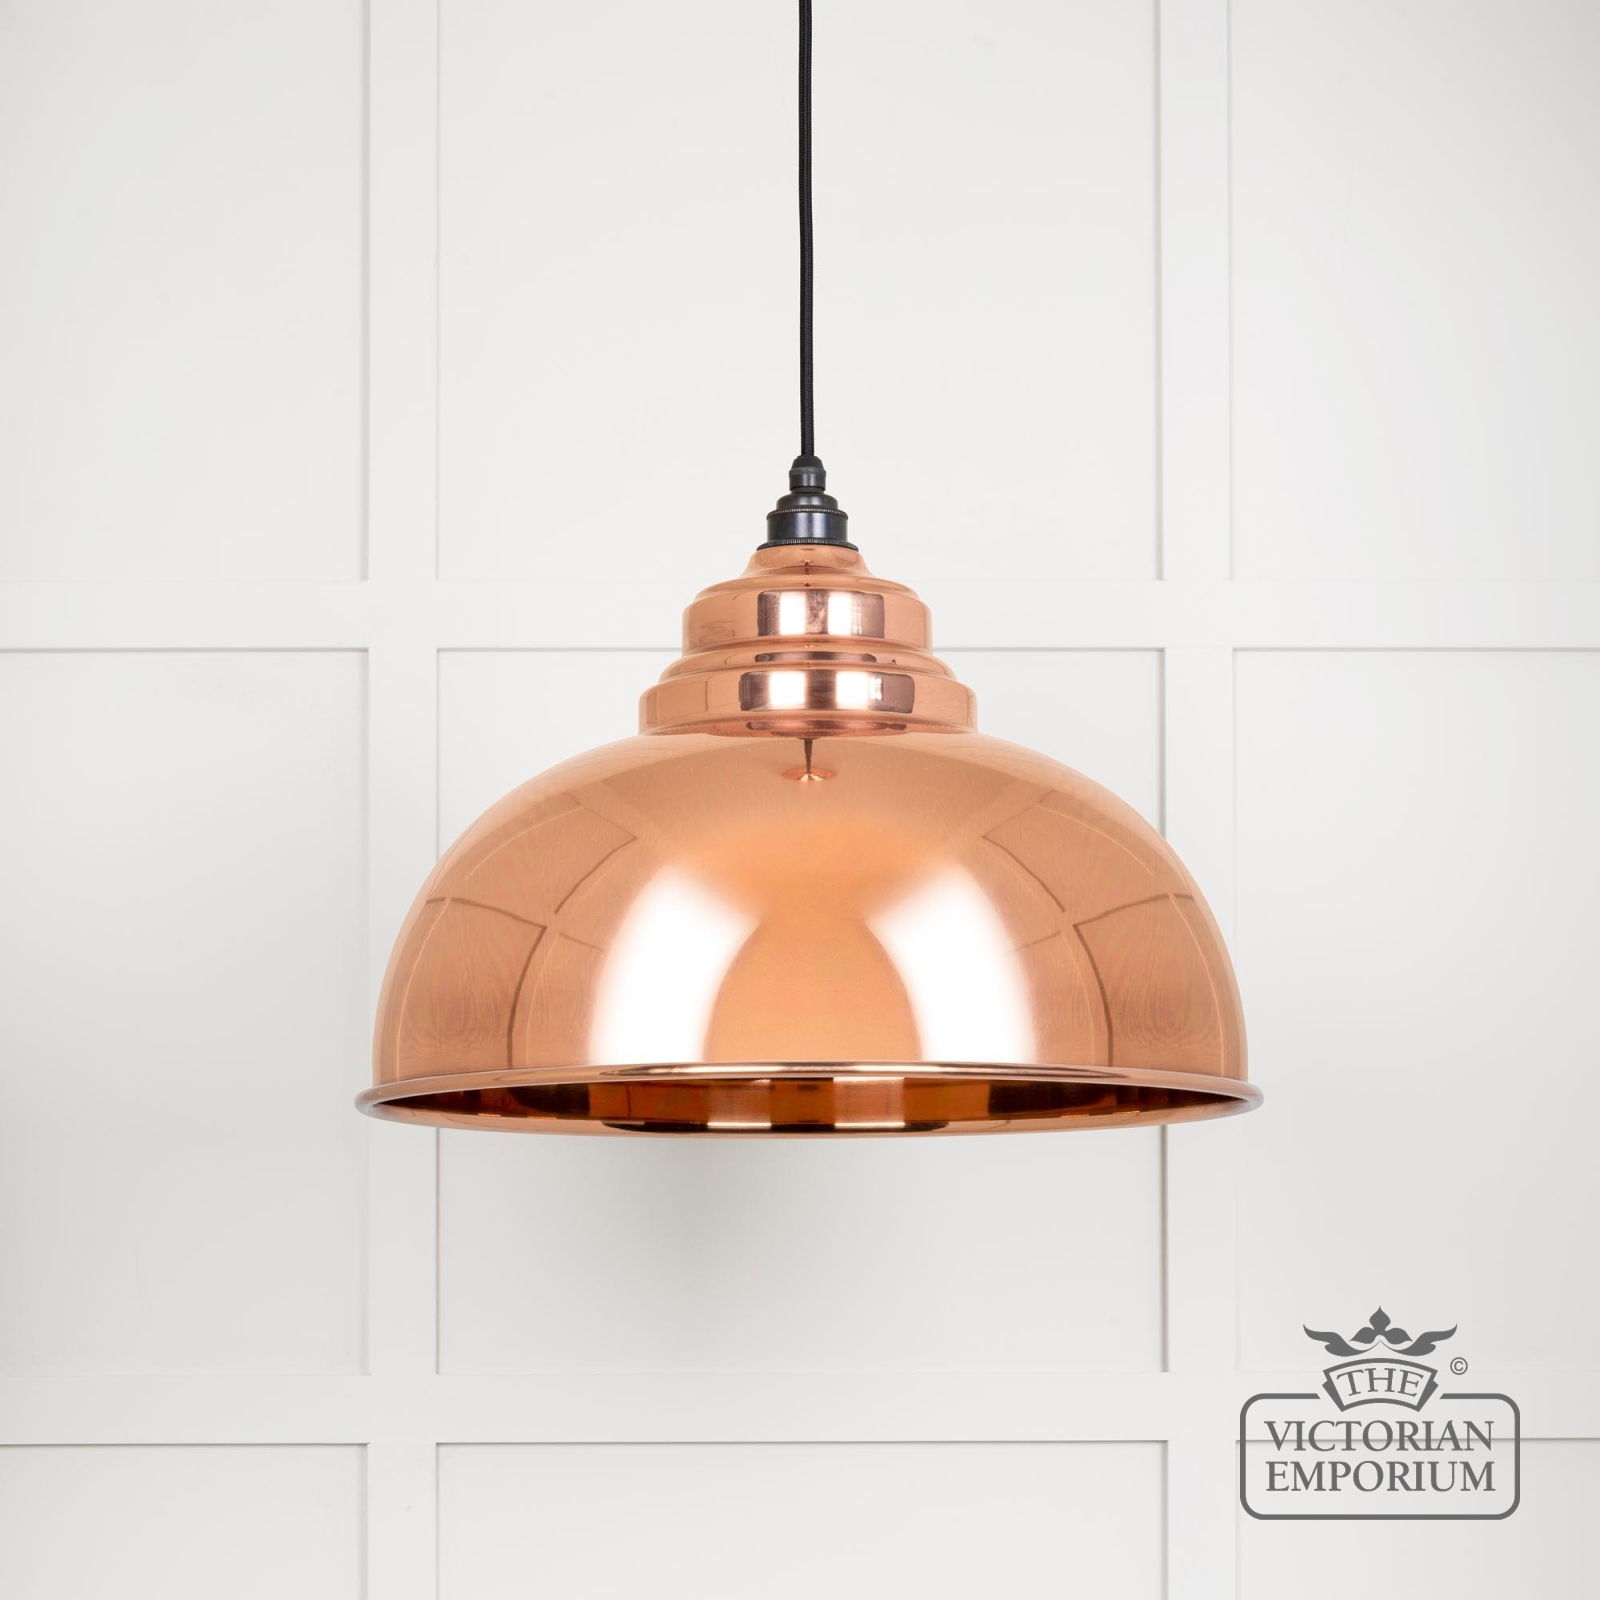 Harlow Pendant Light in Smooth Copper